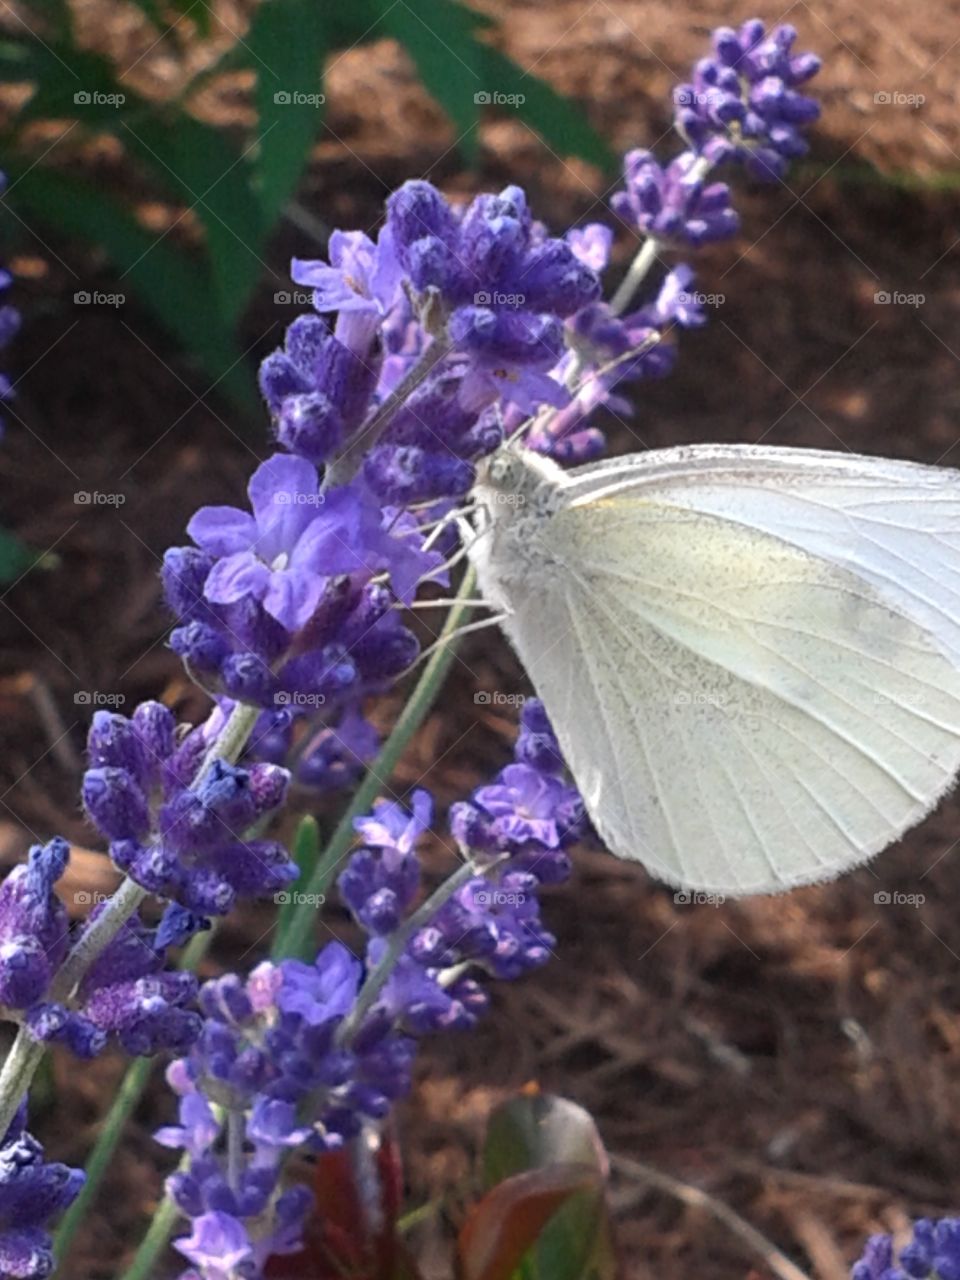 Butterfly on the Lavender. This little garden gem stopped for a sweet sip of Lavender.